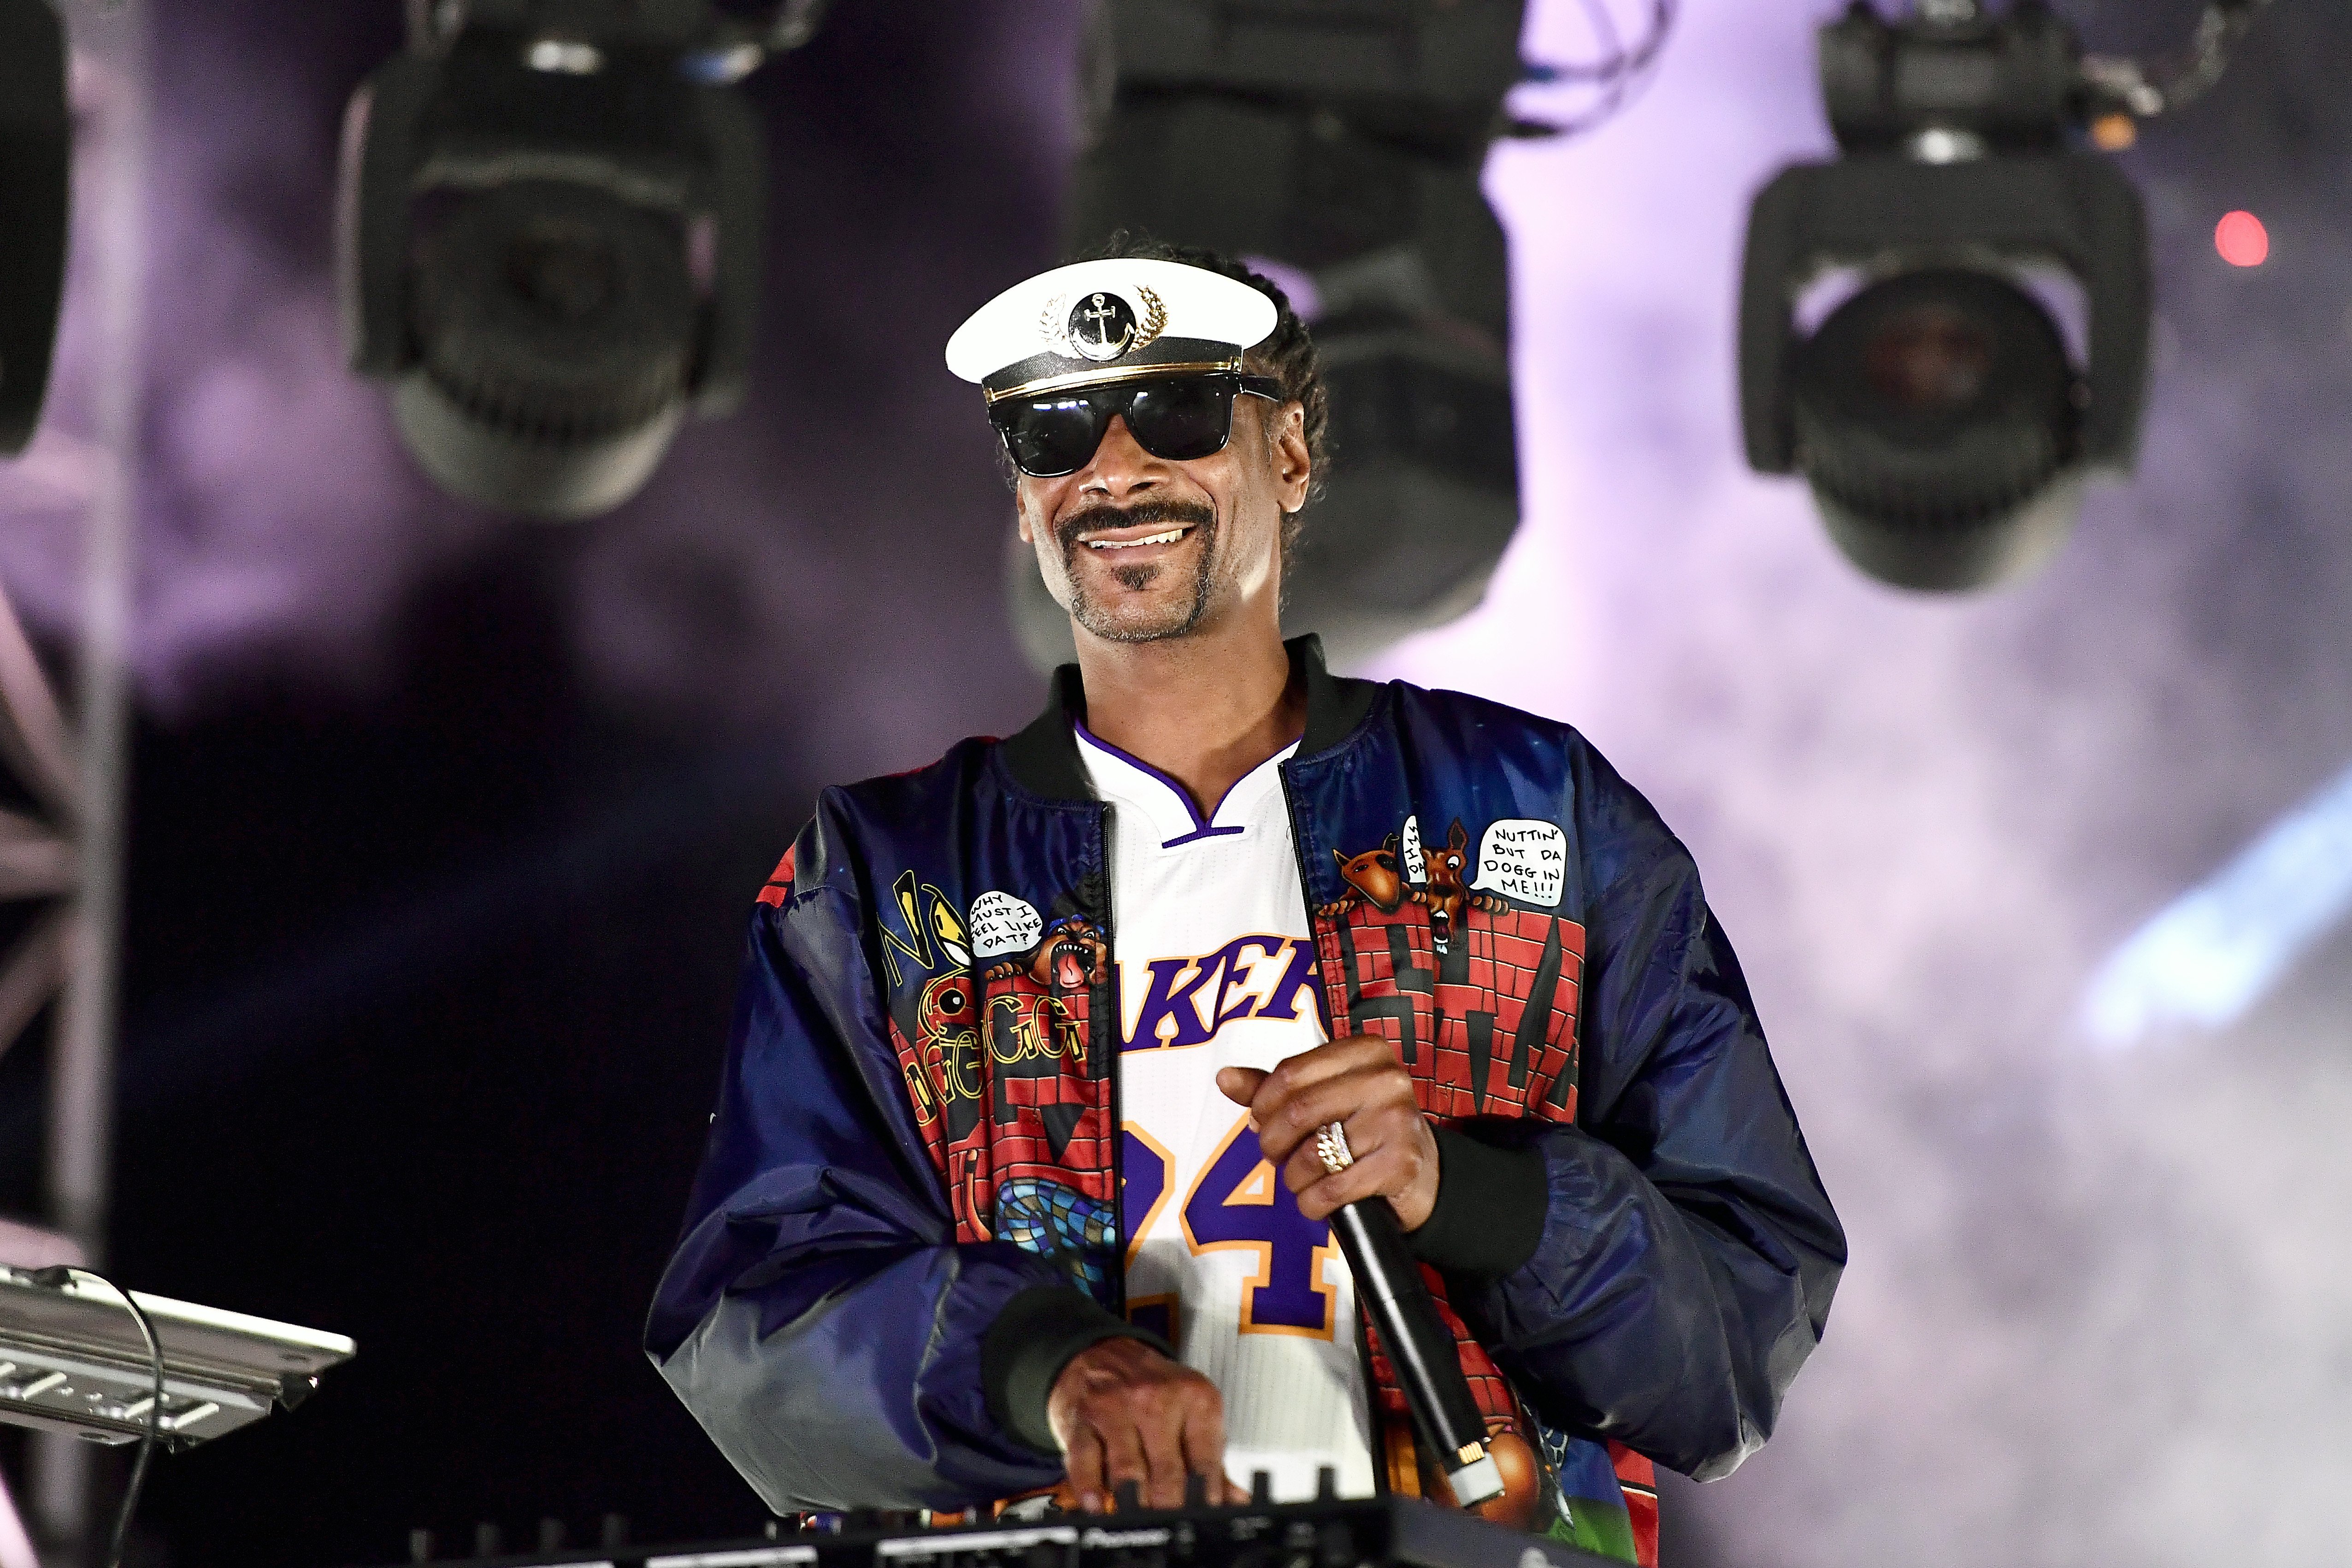 Snoop Dogg at the "Concerts in Your Car" drive-in concert on October 2, 2020 in Ventura, California. | Photo: Getty Images